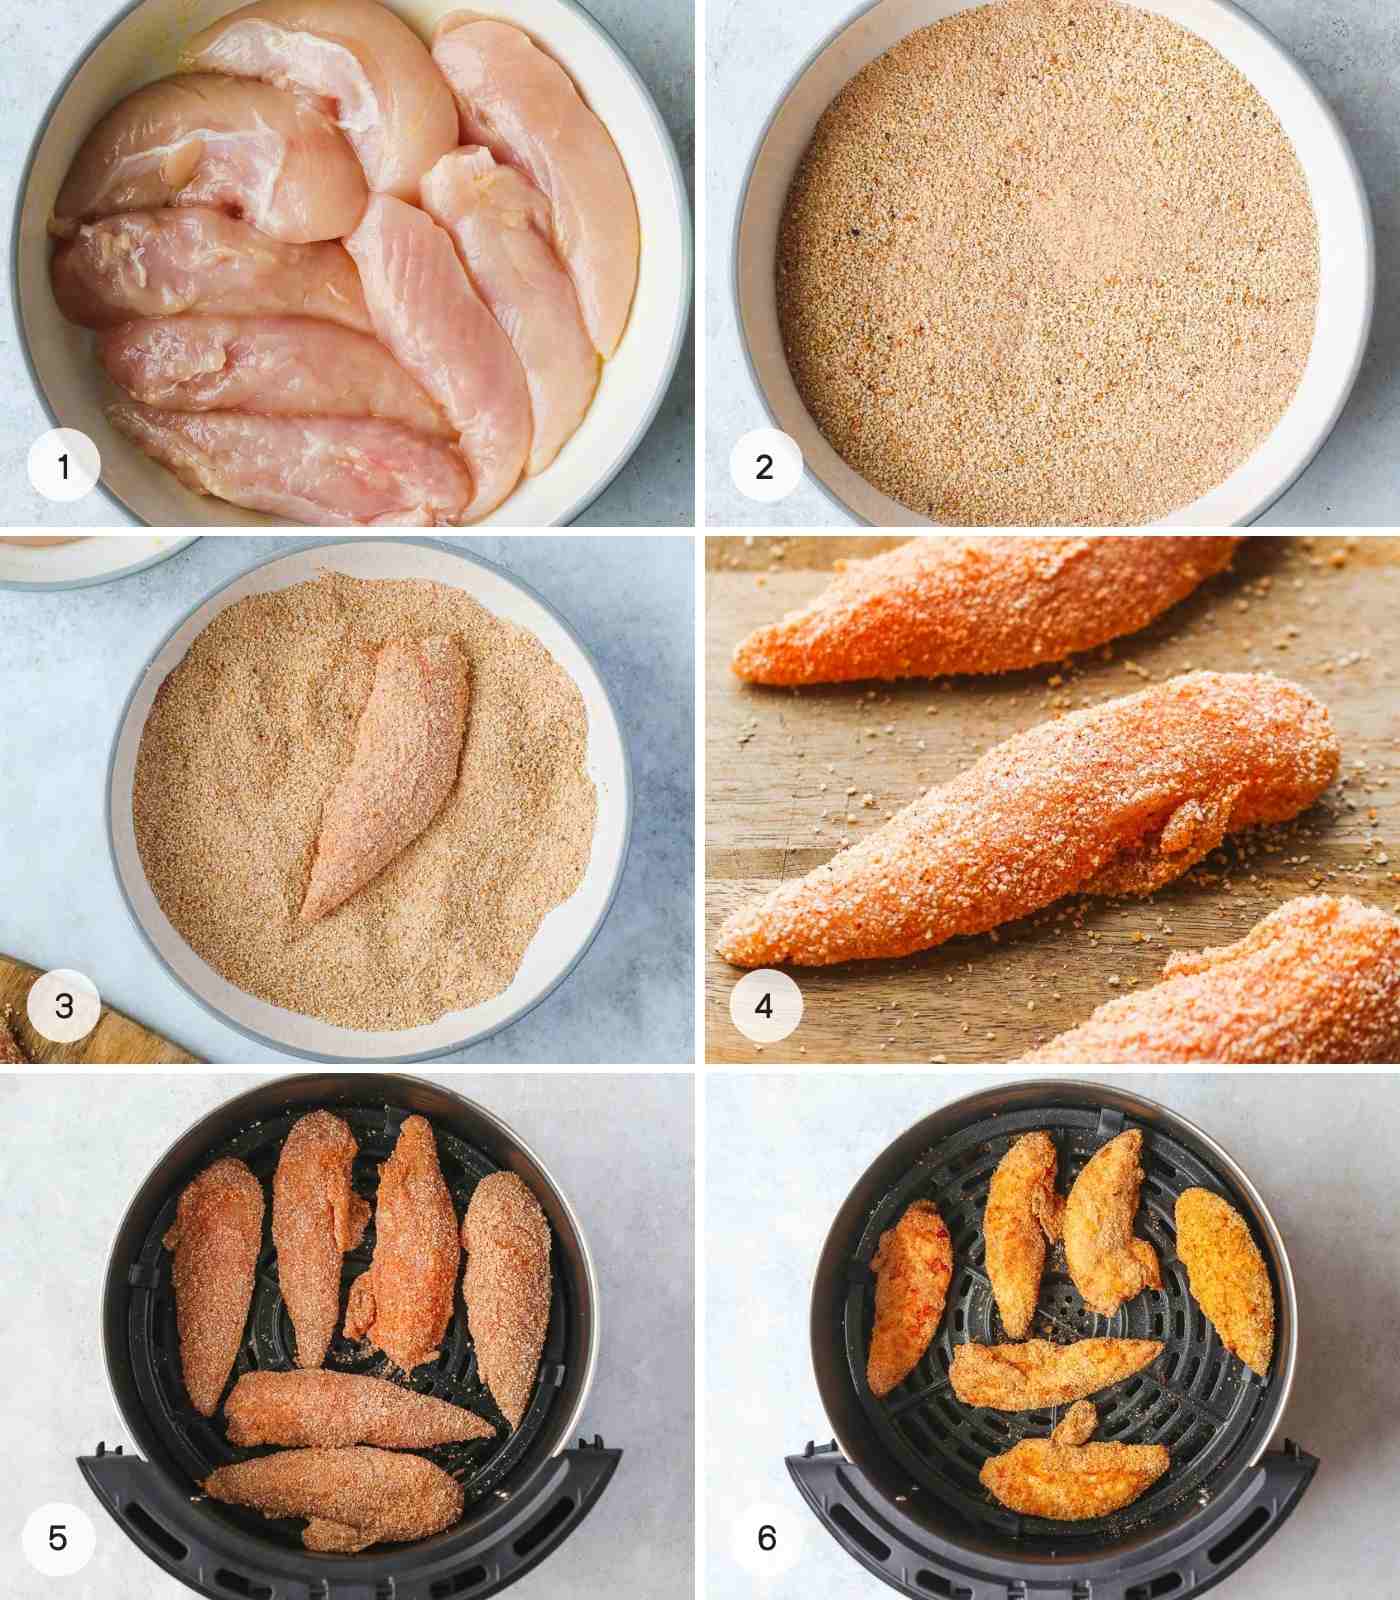 A collage with 6 images to illustrate how to bread chicken tenders and air fry them